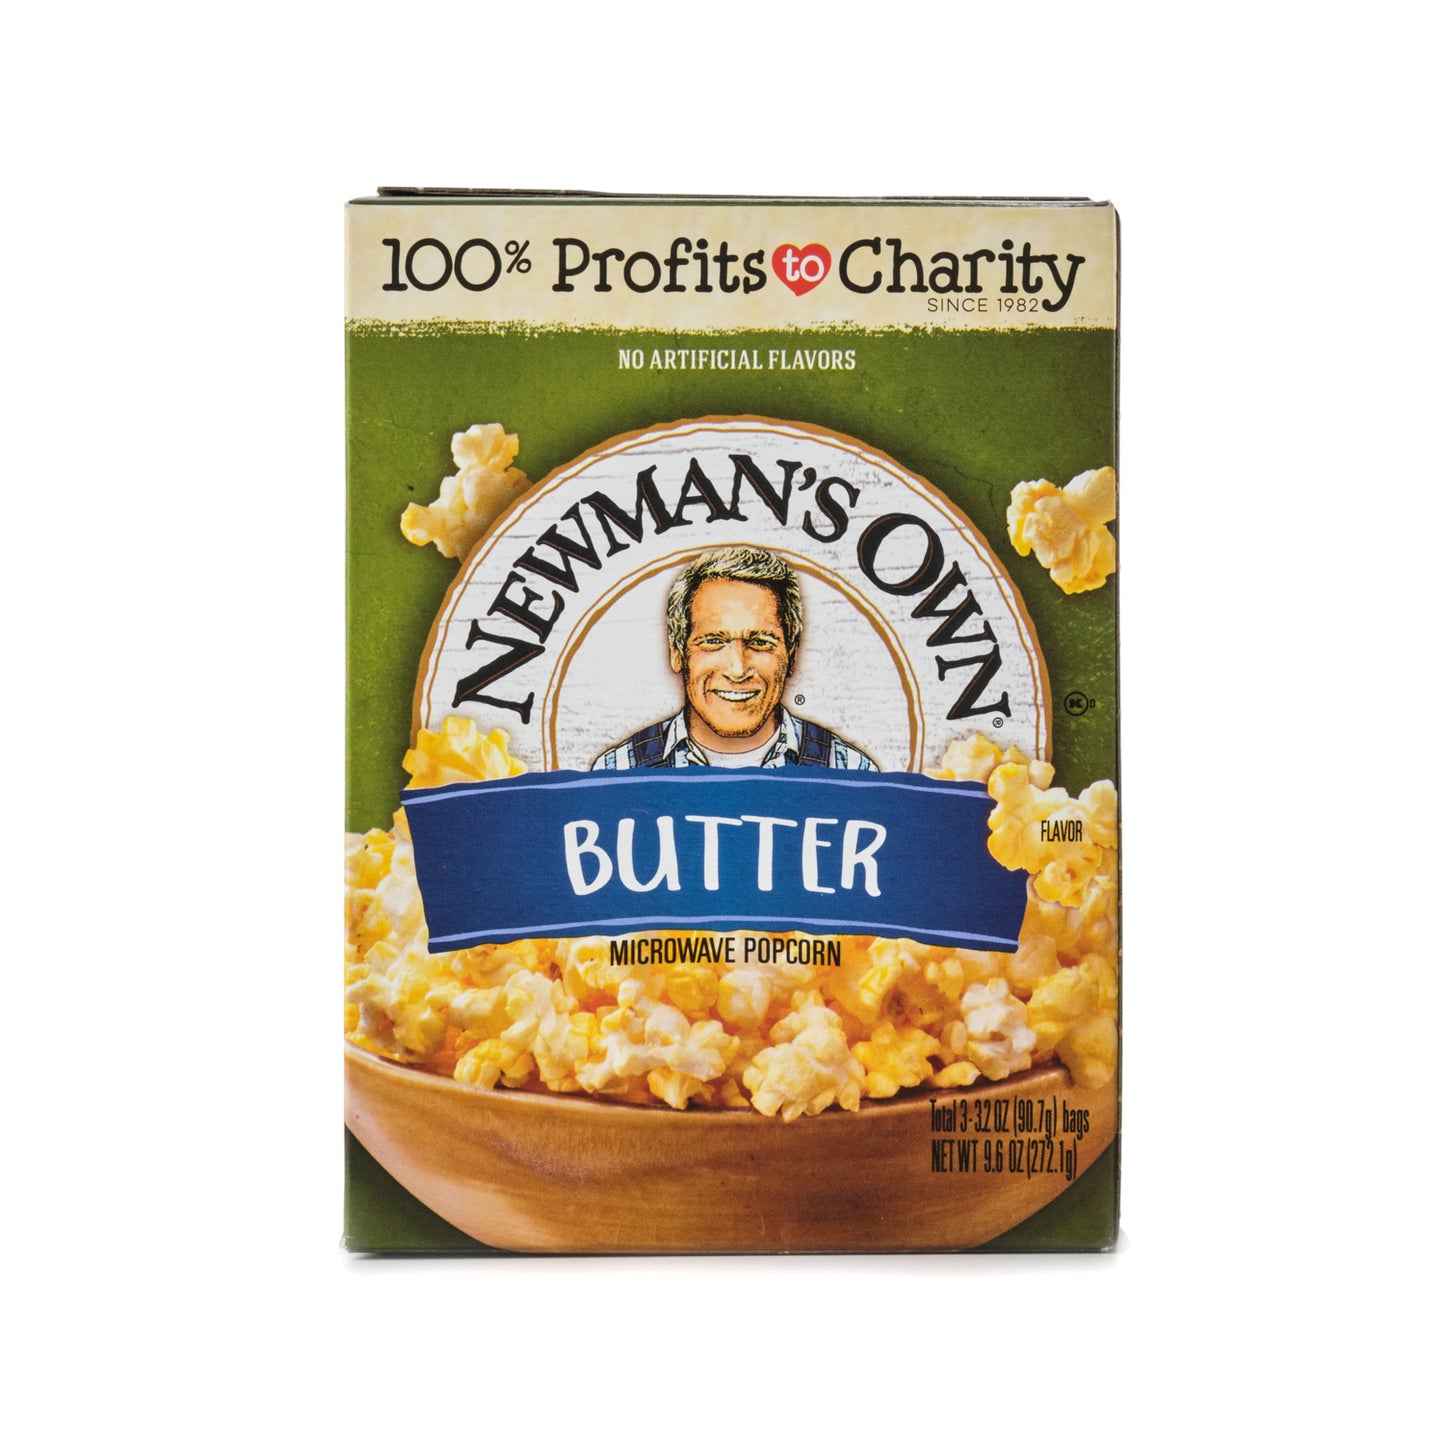 Newman's Own Butter Microwave Popcorn 272.1g (3 x 91g bags)